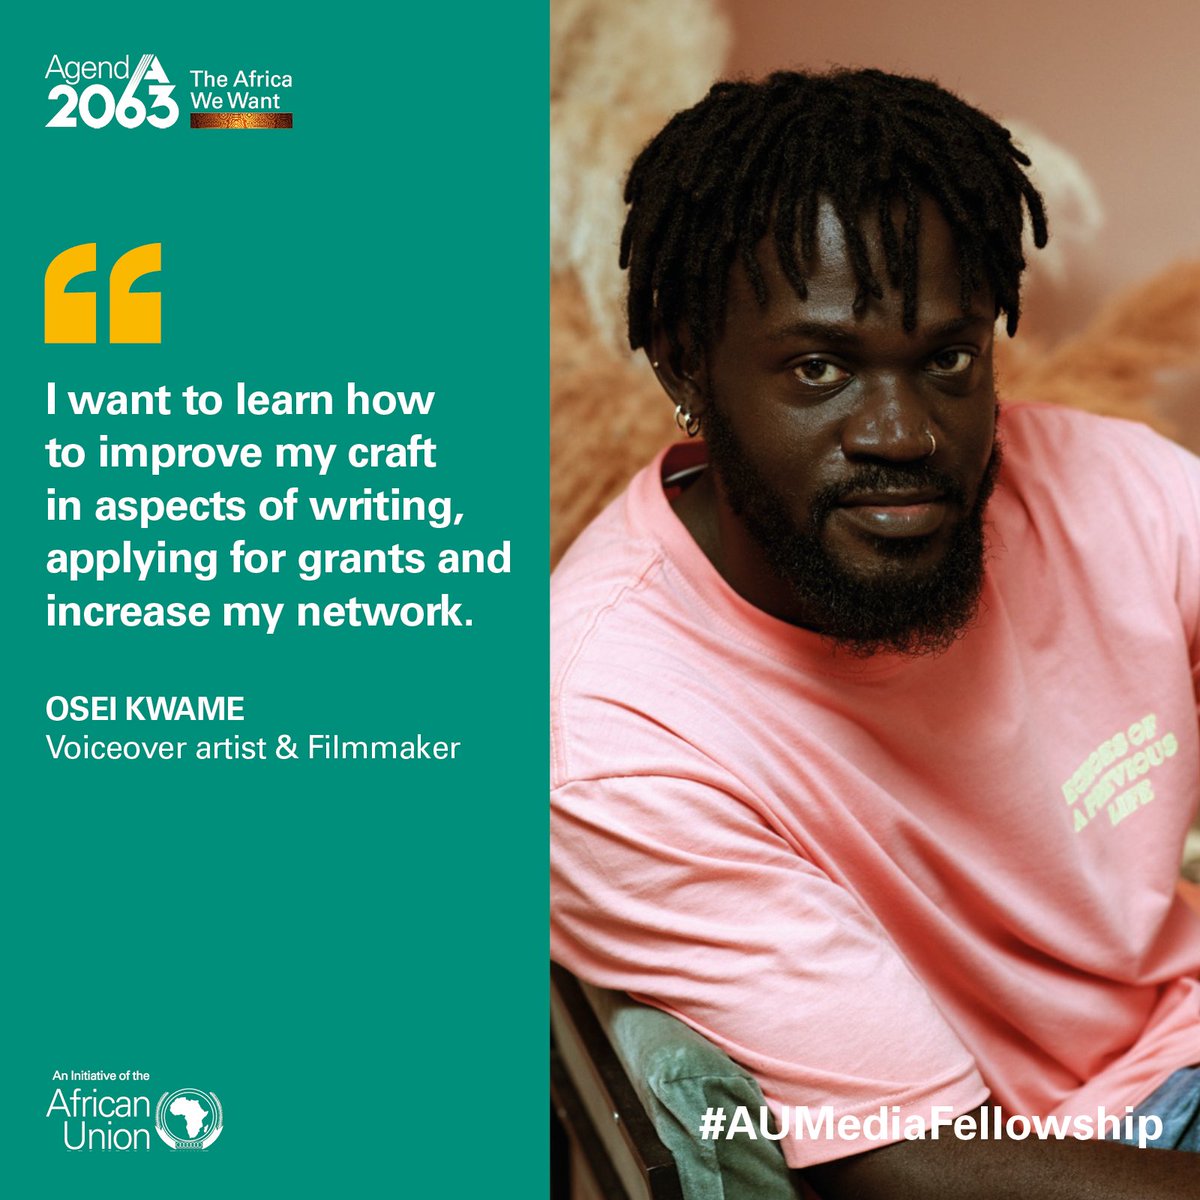 Our Fellow of the week is Osei Kwame from Ghana, an experienced radio broadcaster now turned freelance voiceover artist and filmmaker with a passion to use film, photography, and other media to tell true and beautiful human stories on the African continent. #AUMediaFellowship